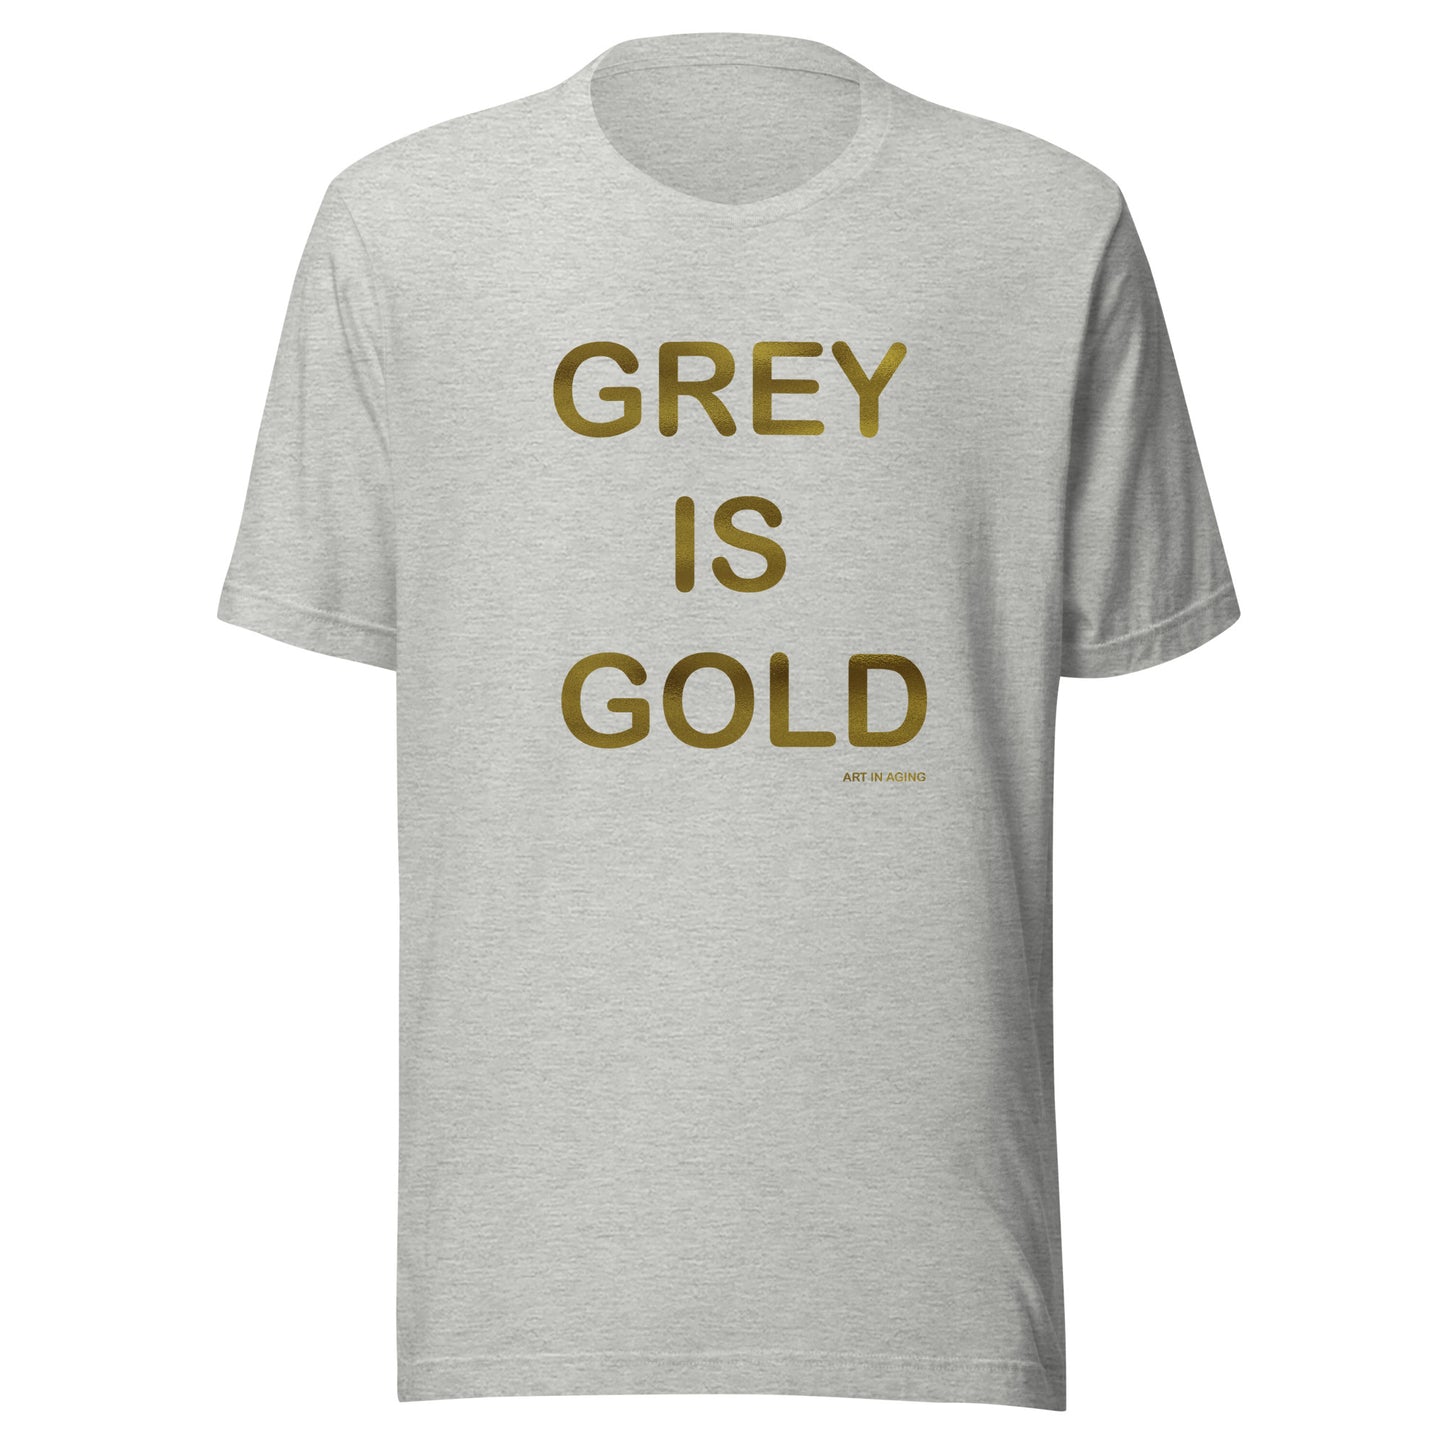 Grey is Gold T-Shirt | Art in Aging